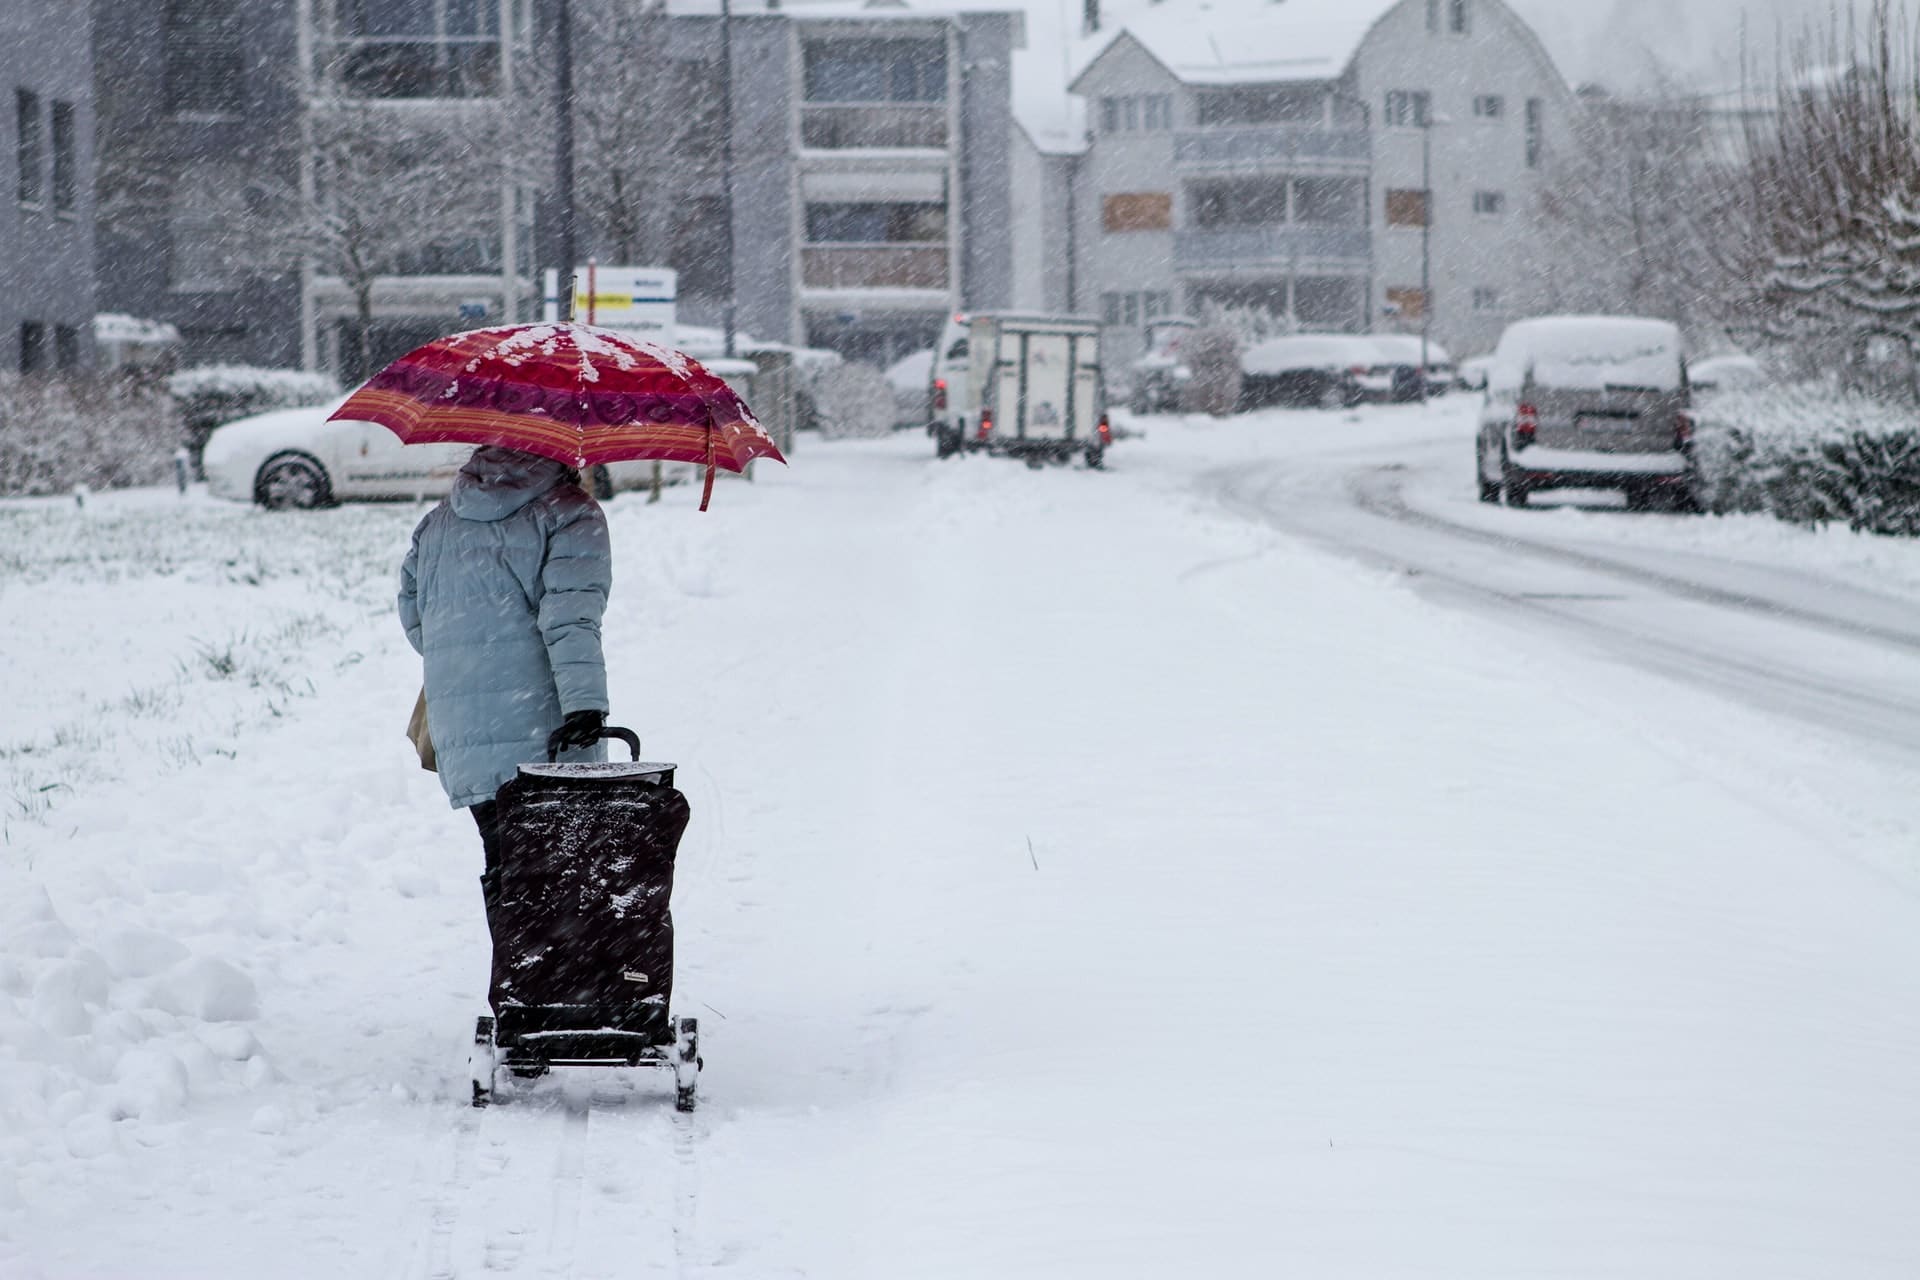 A woman walking with a cart in the snow representing new time limitations on slip and fall claims due to snow and ice